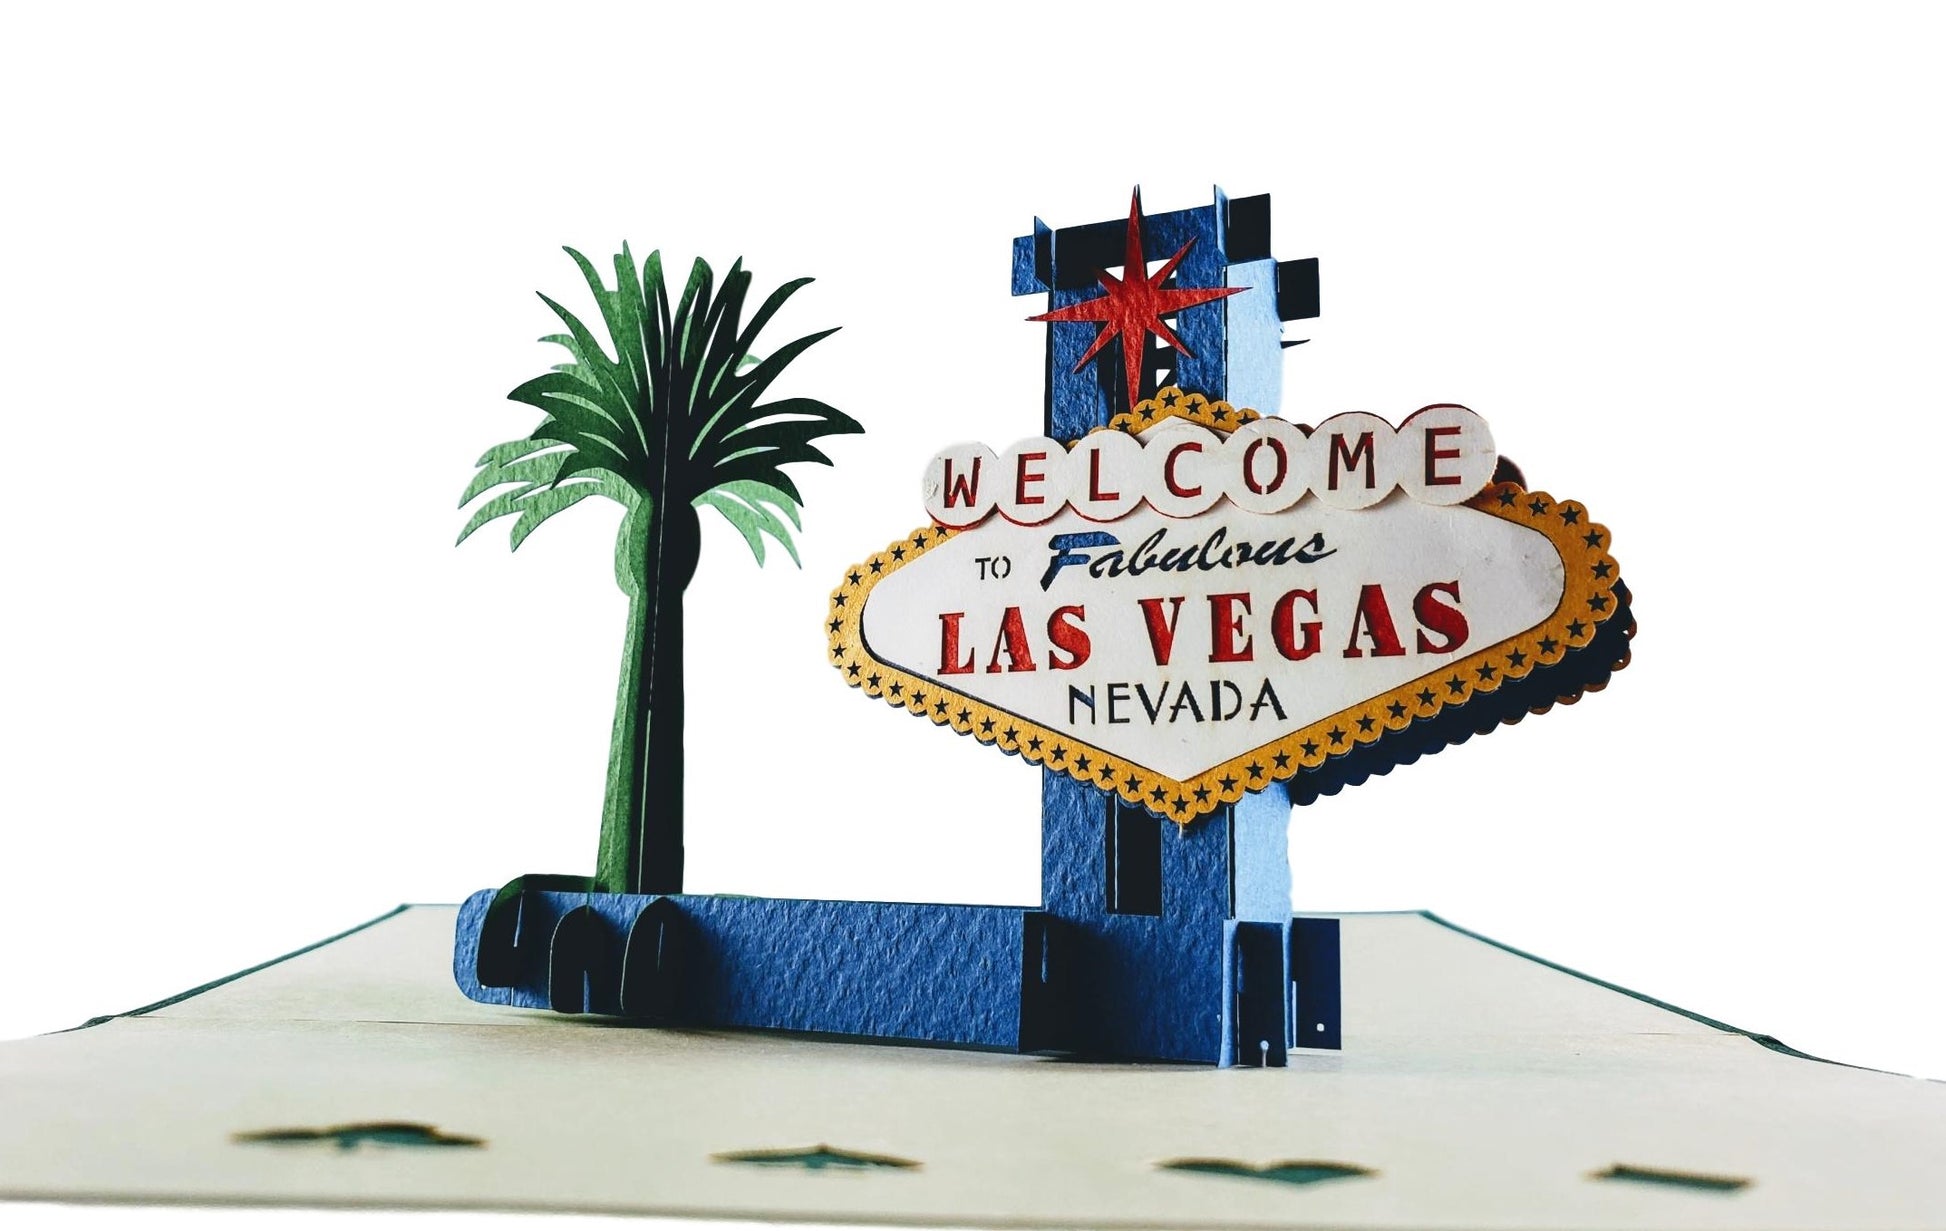 Las Vegas 3D Pop Up Greeting Card - Front Page - Fun - Good Luck - Iconic - Just Because - Special D - iGifts And Cards